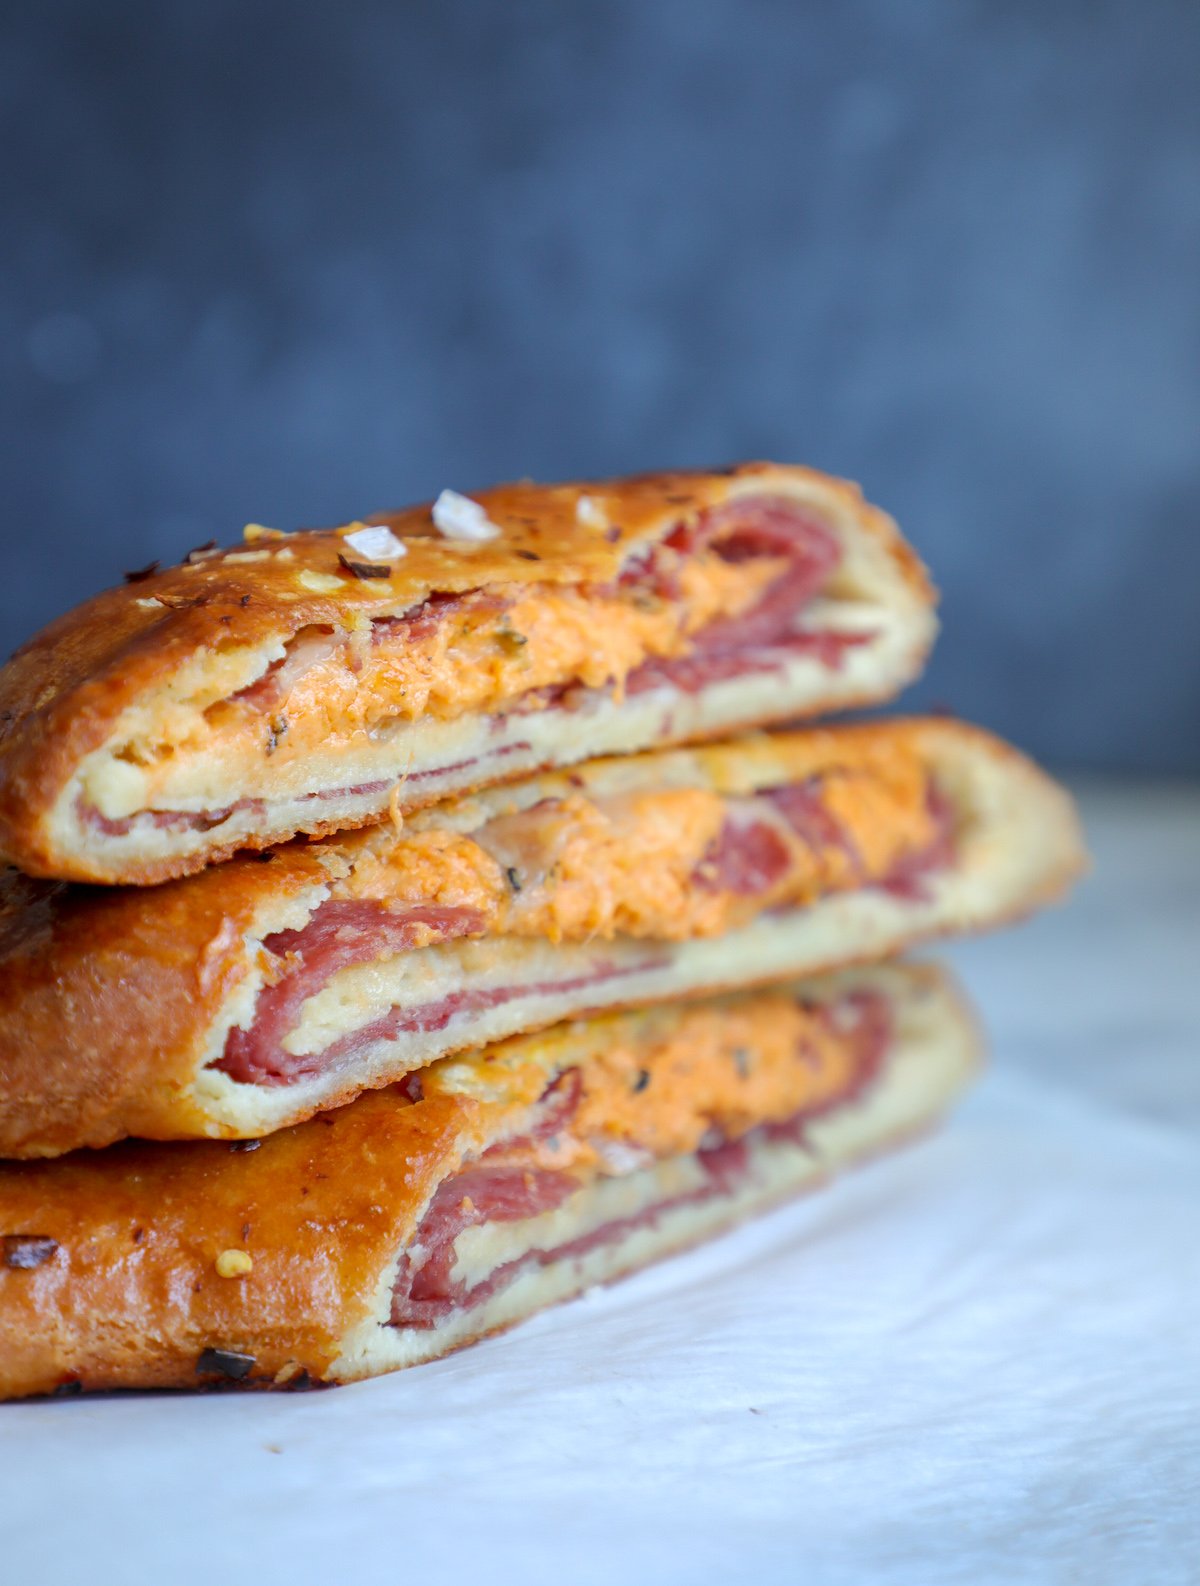 Keto Stromboli pieces stacked on top of each other - Keto Dinner Ideas